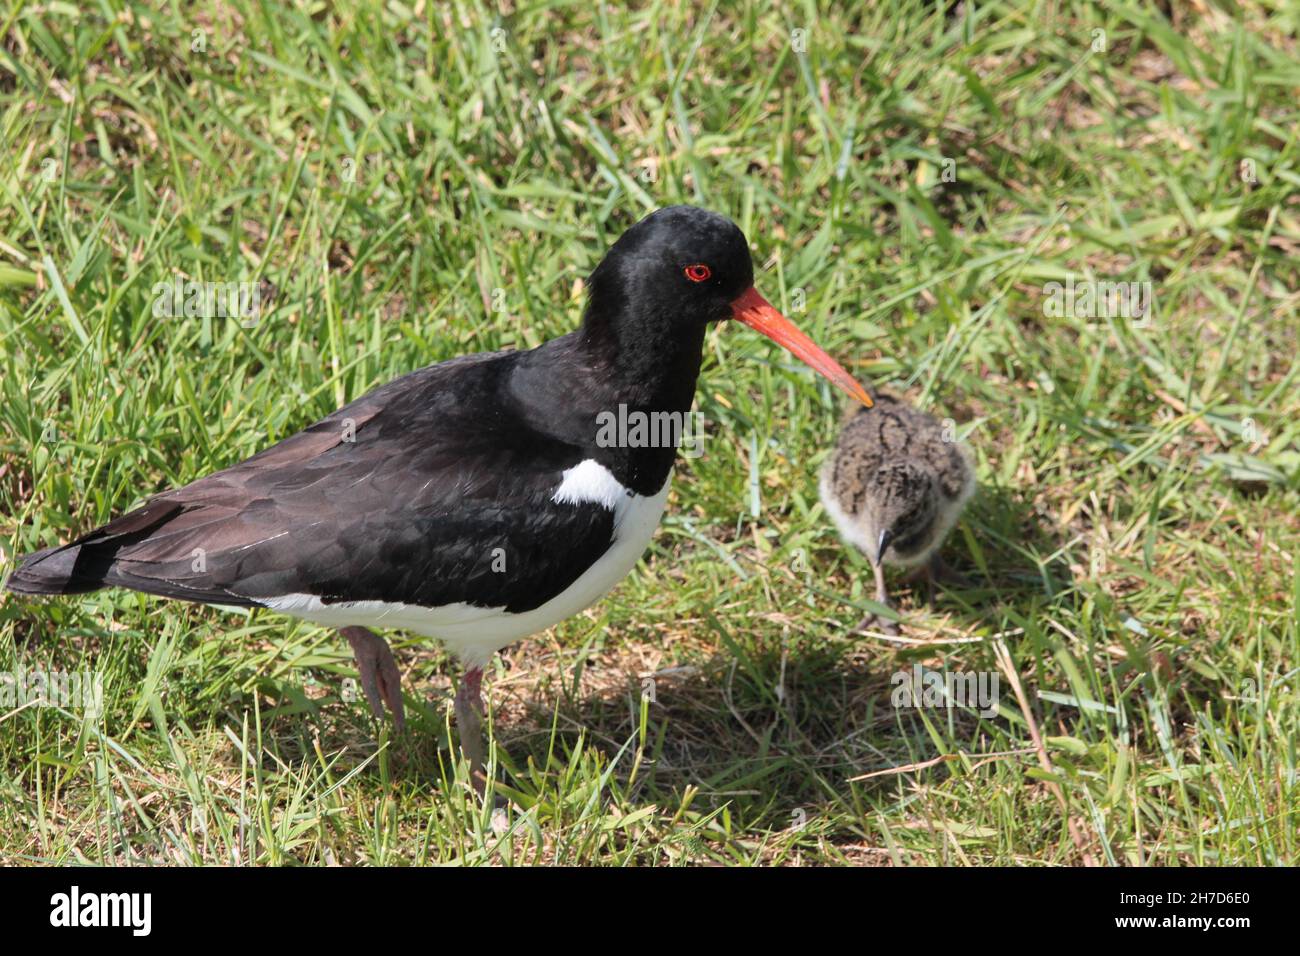 Common Oystercatcher (Haematopus ostralegus) on a meadow at Sehestedt, Germany Stock Photo